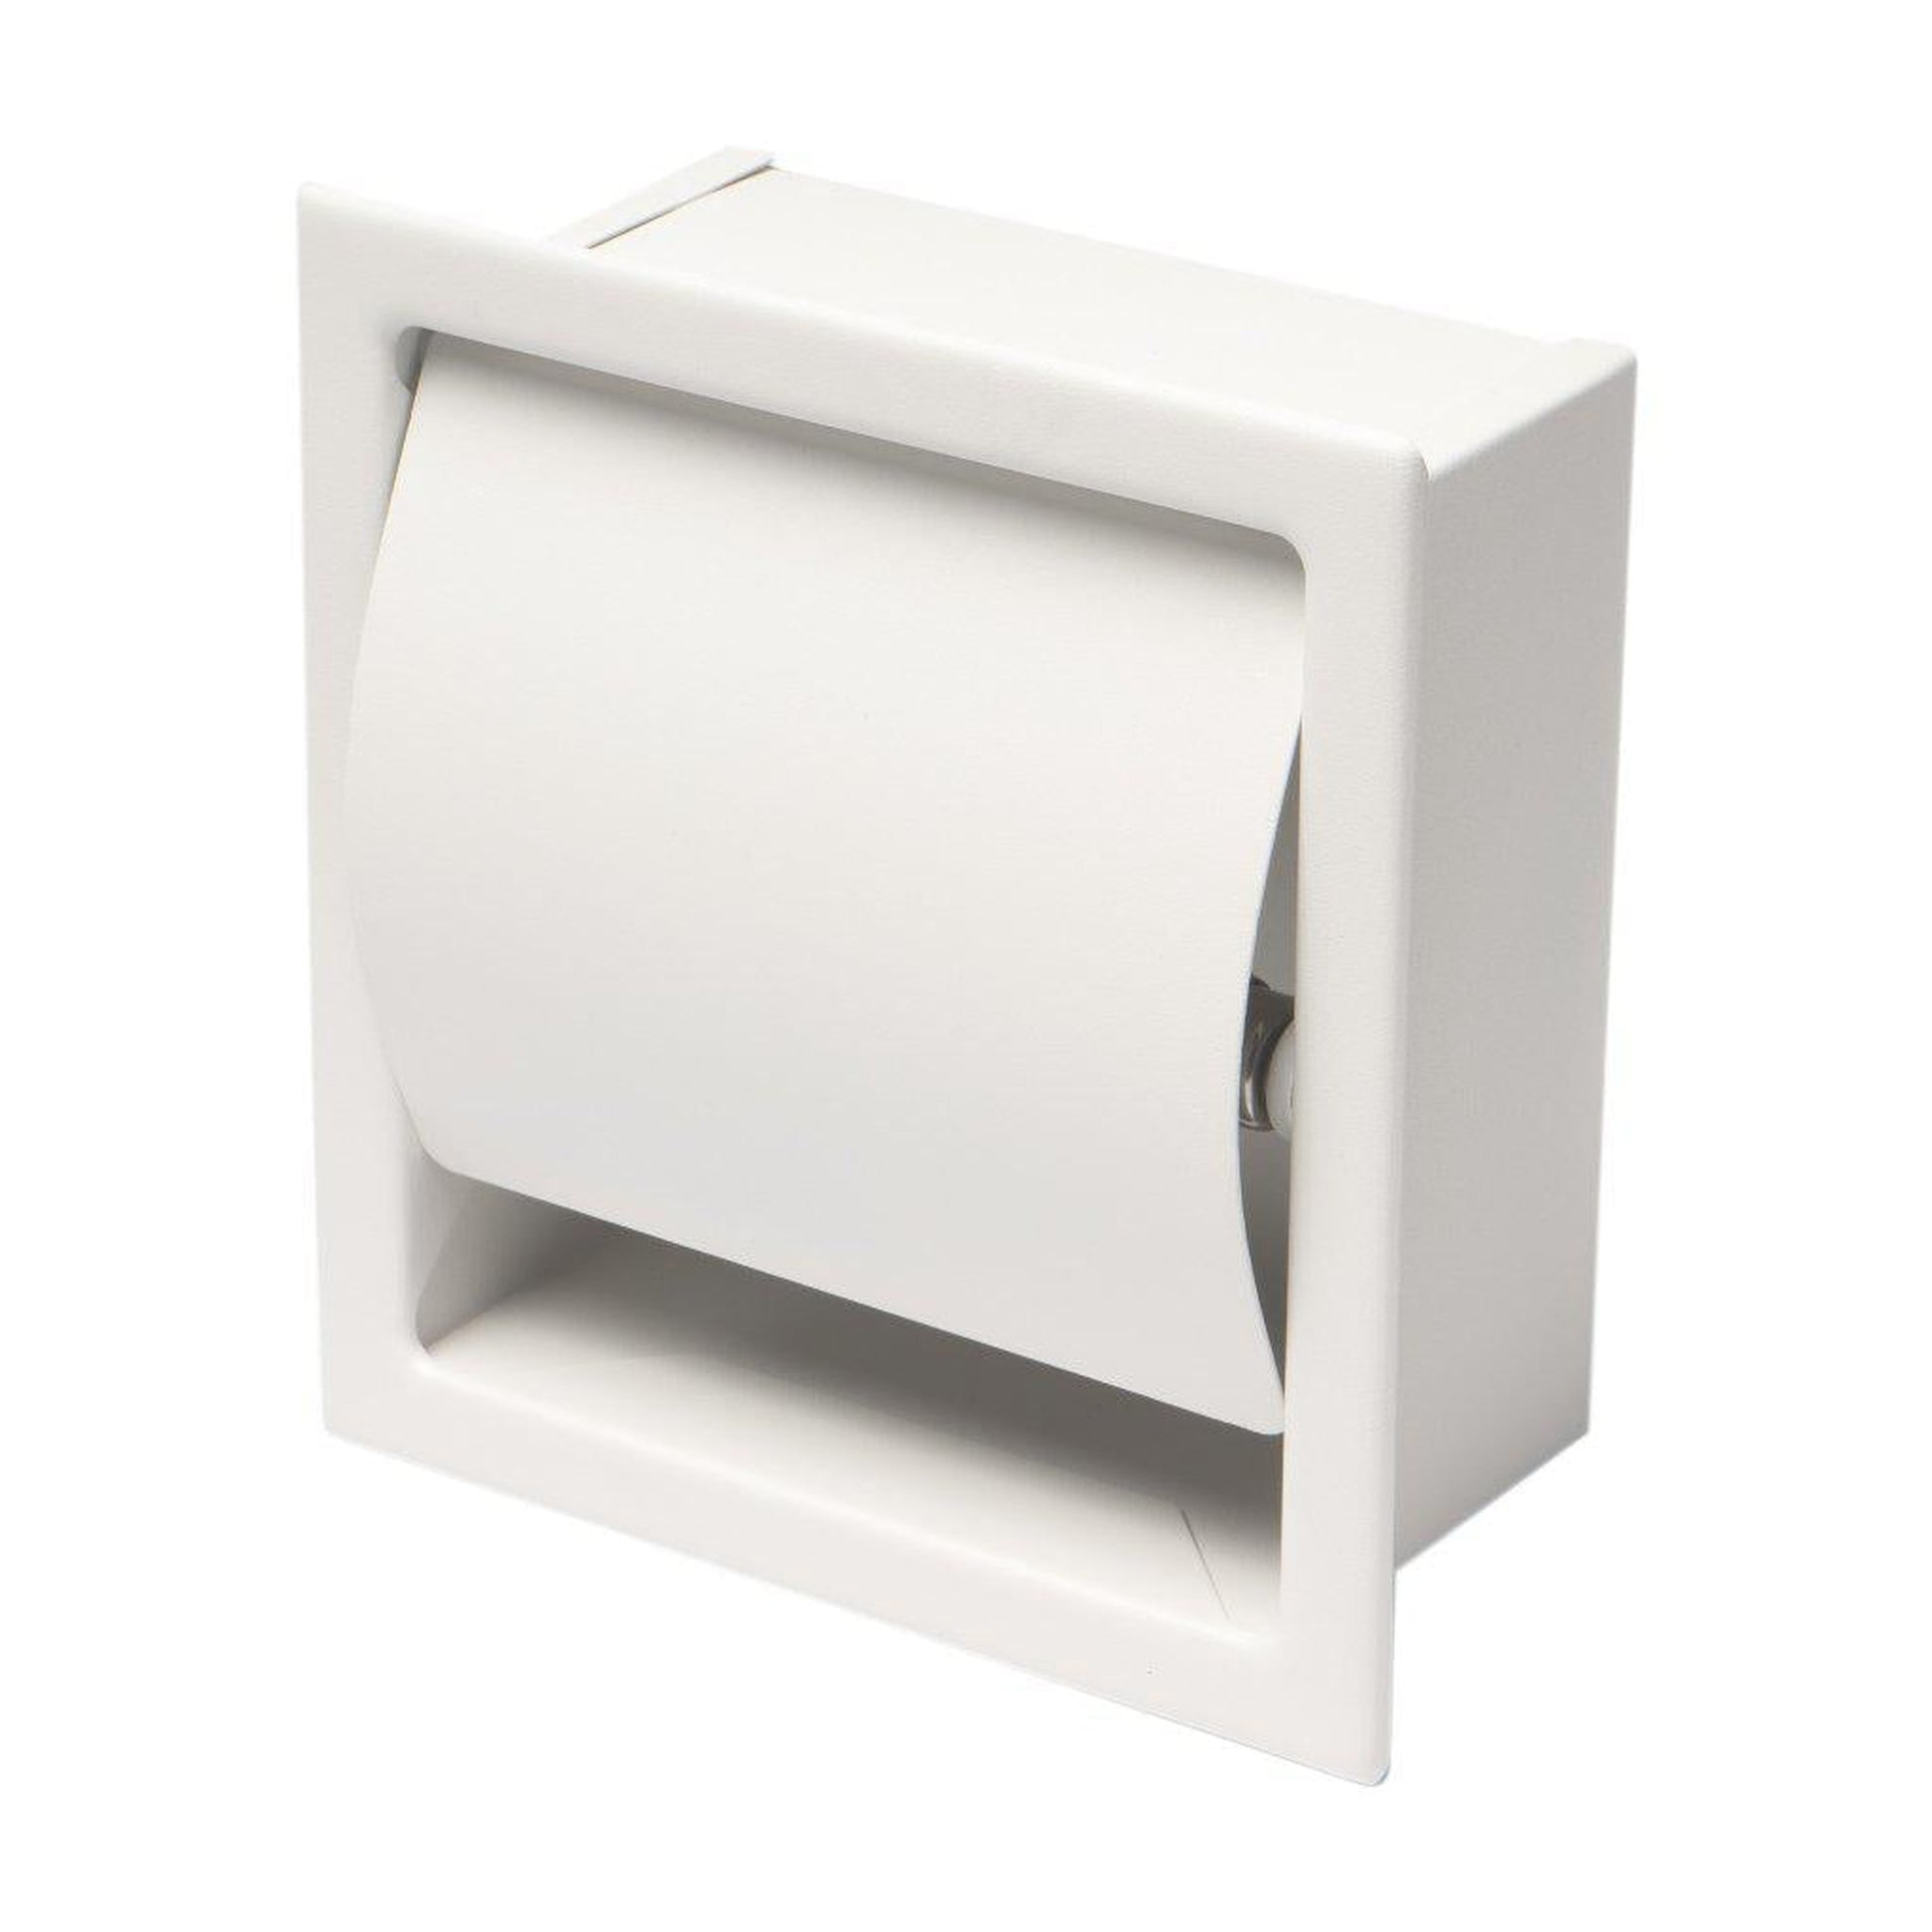 ALFI Brand ABTPC77-W White Matte Stainless Steel Recessed Toilet Paper Holder With Cover